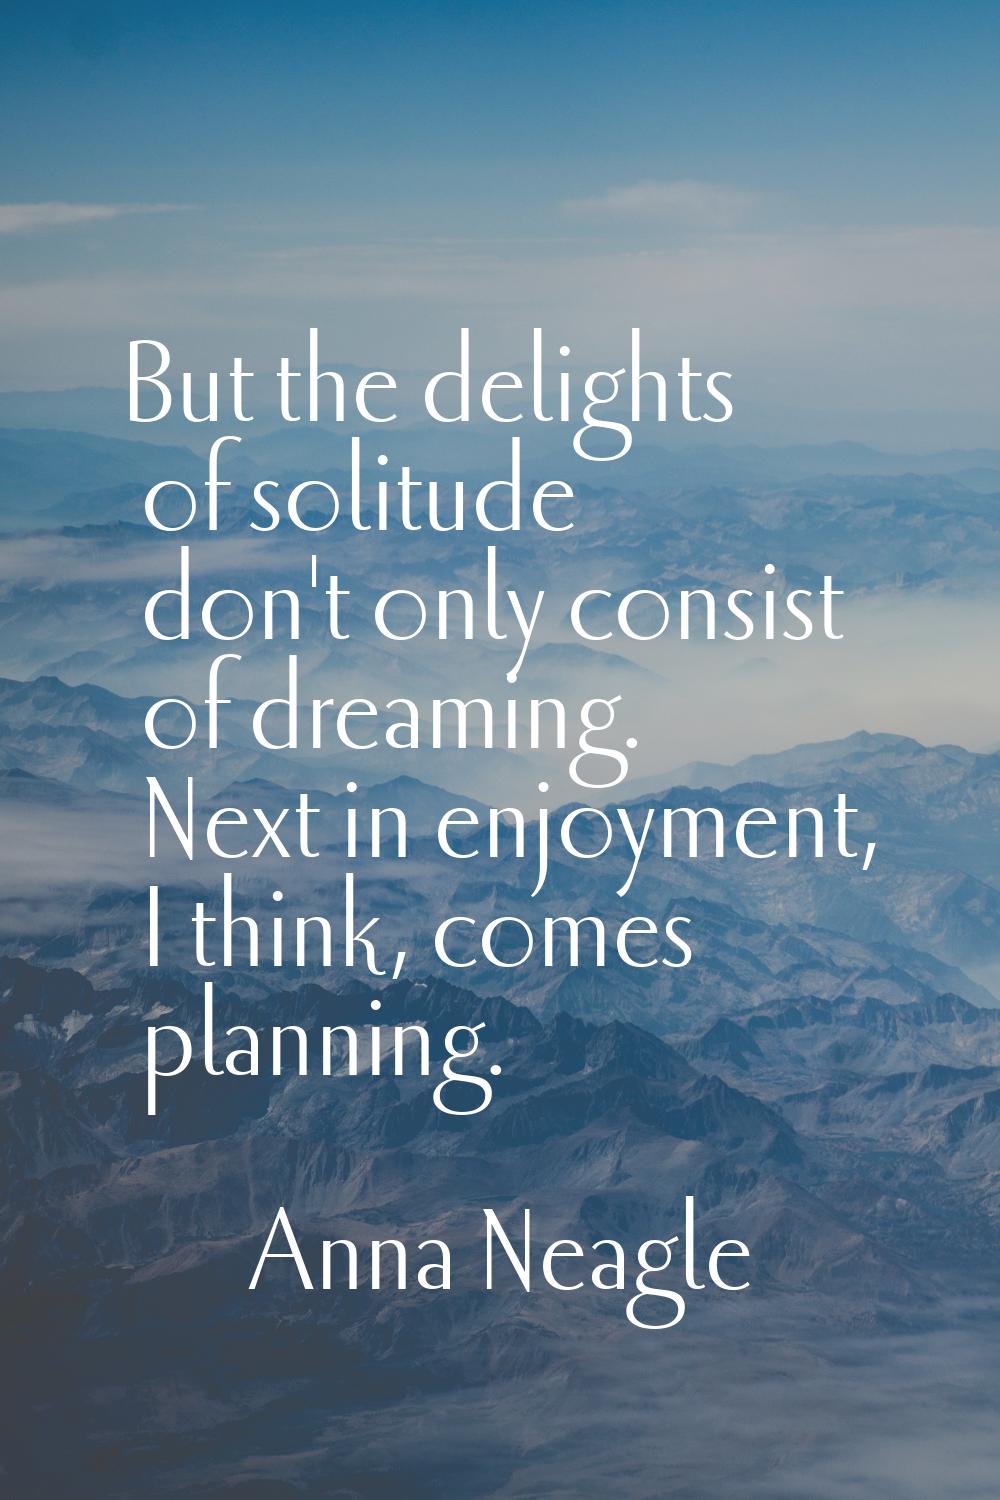 But the delights of solitude don't only consist of dreaming. Next in enjoyment, I think, comes plan